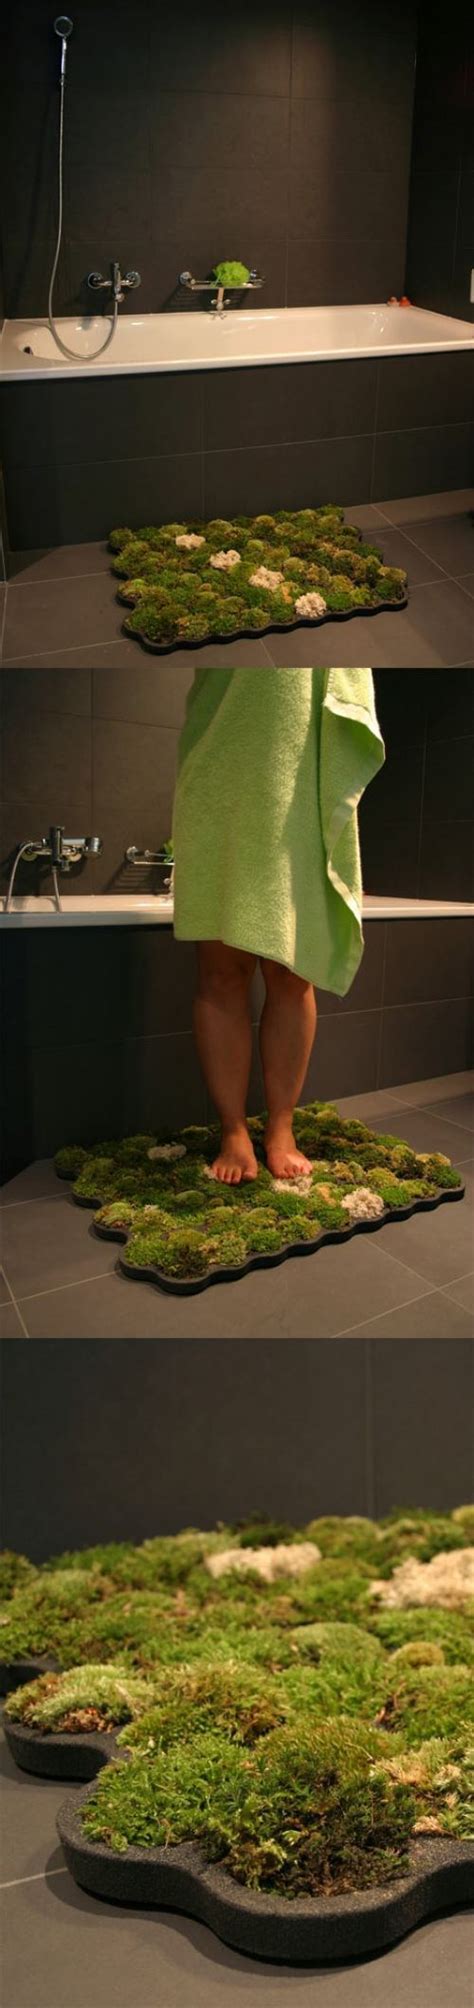 It is illuminated by recessed it includes an inset shelf and a lovely floral rug that lays on the hex tile flooring. Living Moss bath mat … | Green bathroom rugs, Bathroom ...